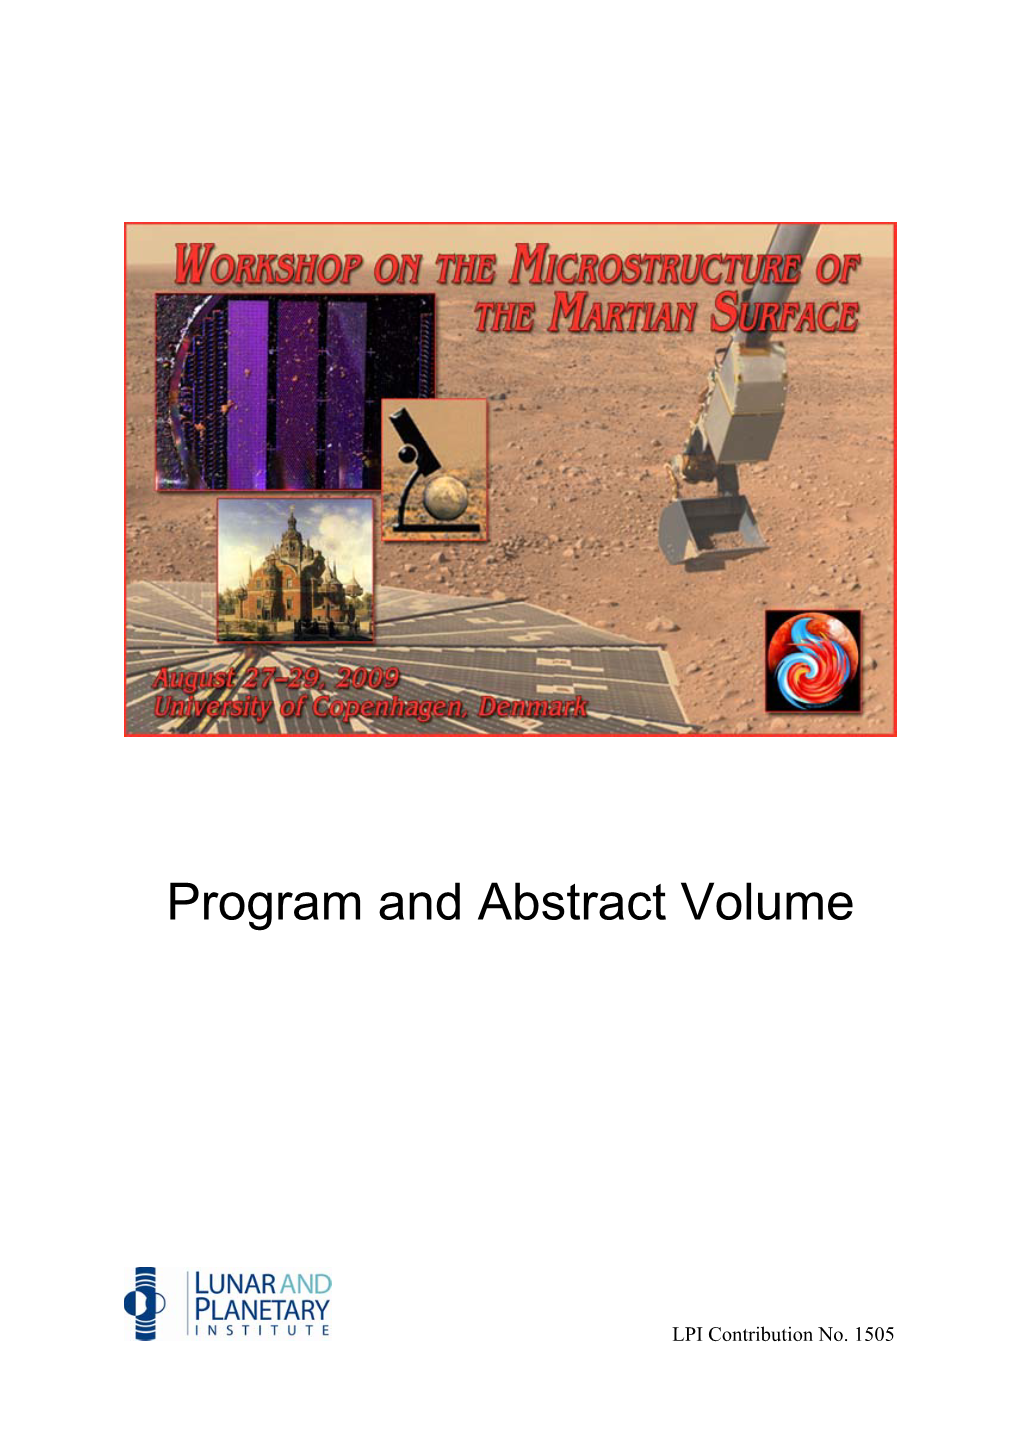 Workshop on the Microstructure of the Martian Surface